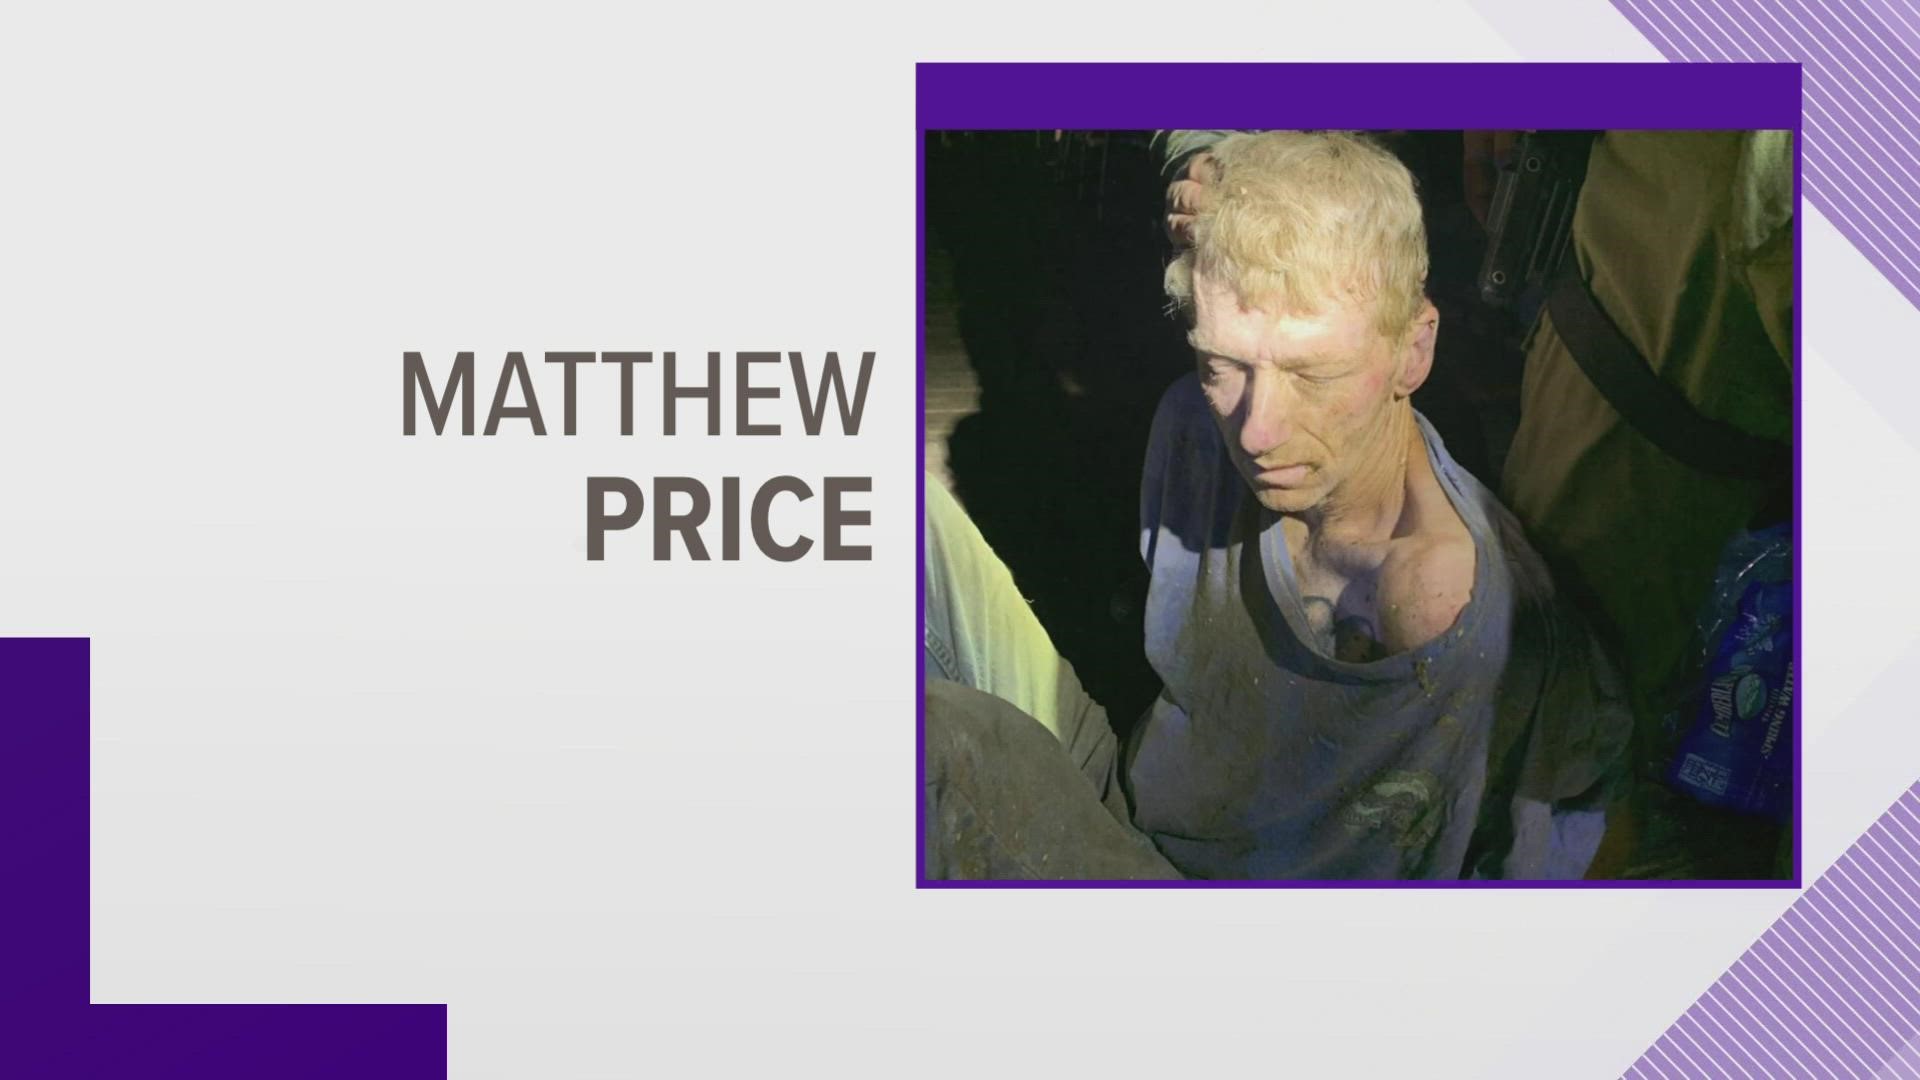 The sheriff's office says deputies took Matthew Price into custody after a long standoff in the Cumberland Gap area.